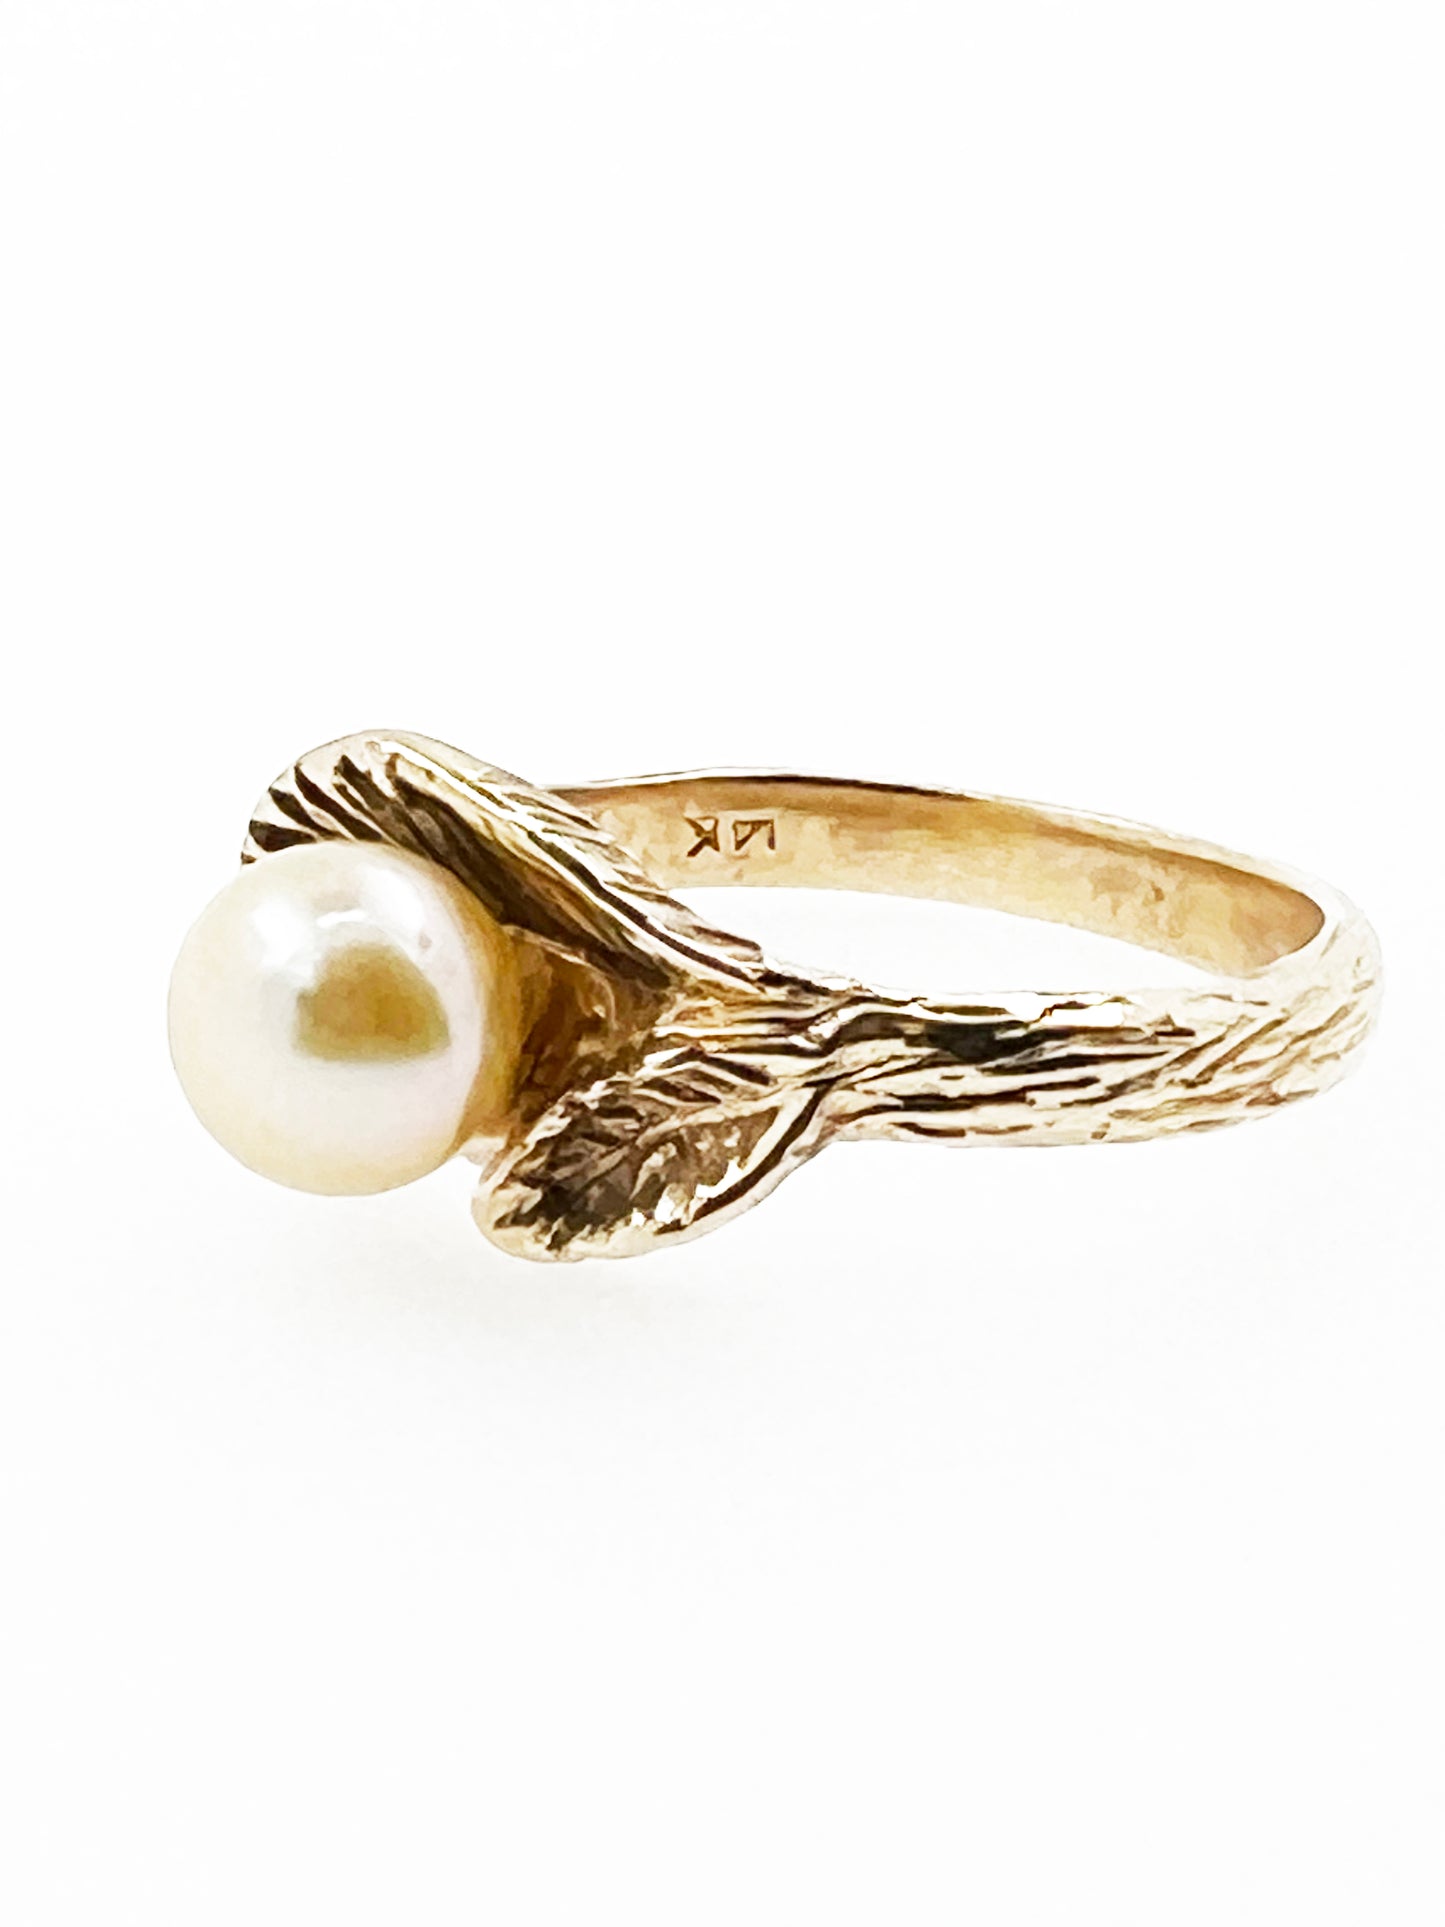 Antique Hand Carved Leafy Pearl Ring in 14k Yellow Gold